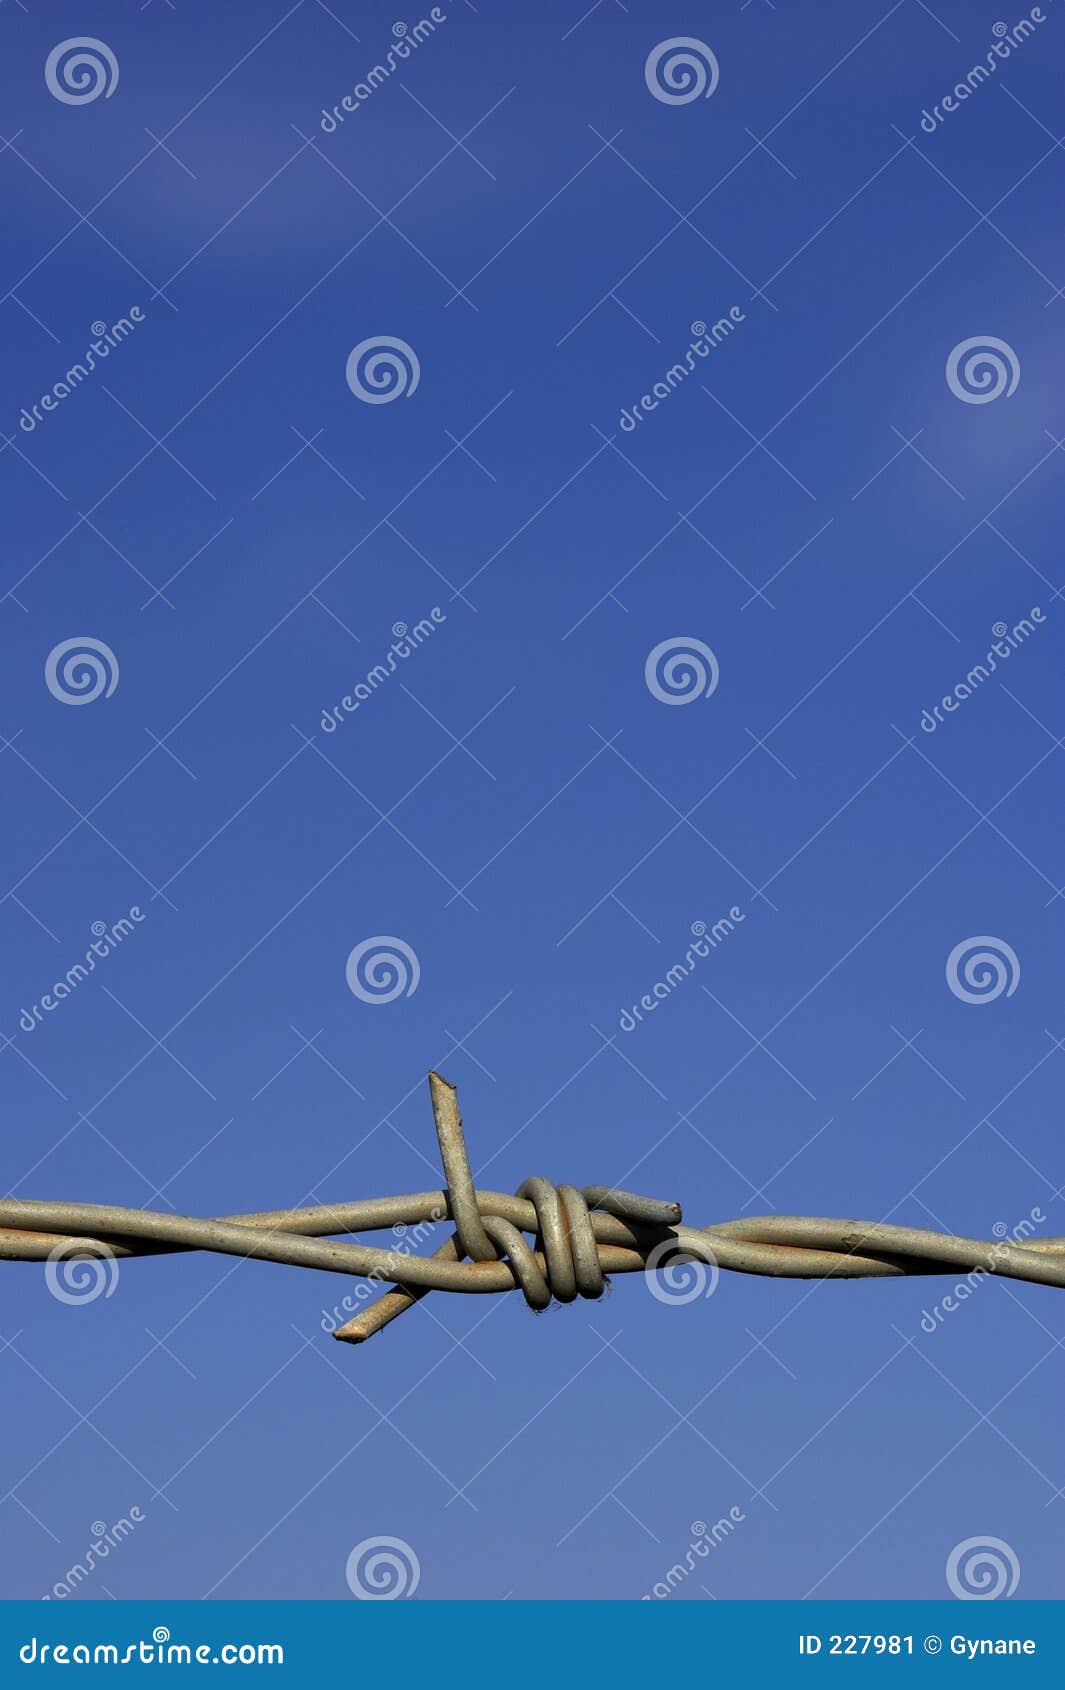 Barbed wire fence detail stock image. Image of marker, barb - 227981
